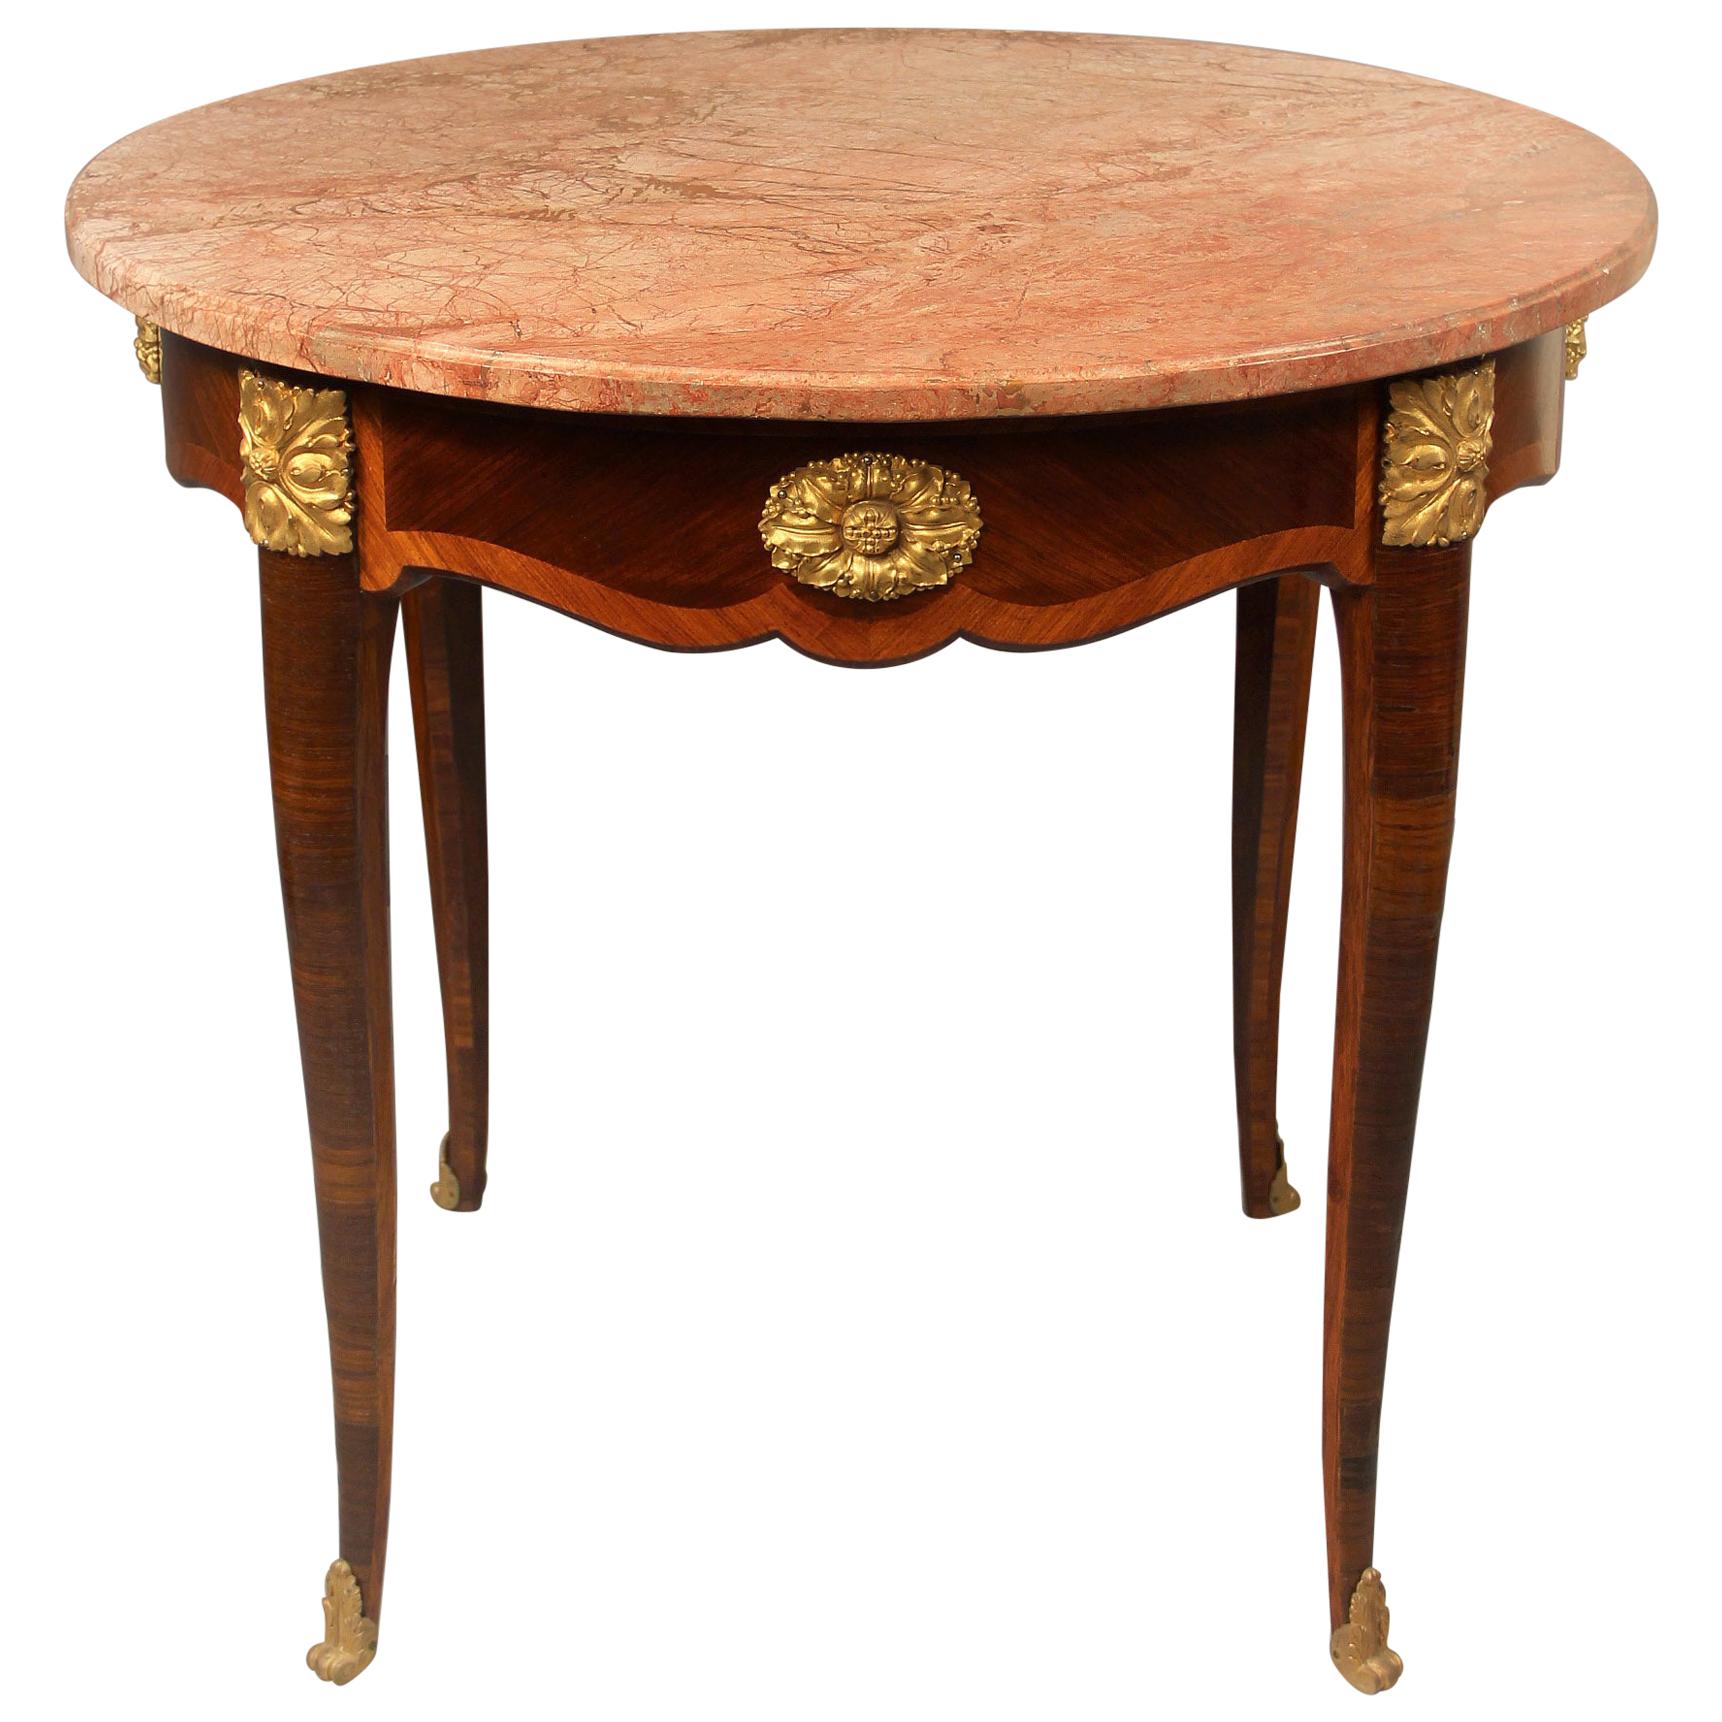 Nice Late 19th-Early 20th Century Gilt Bronze Mounted Center Table